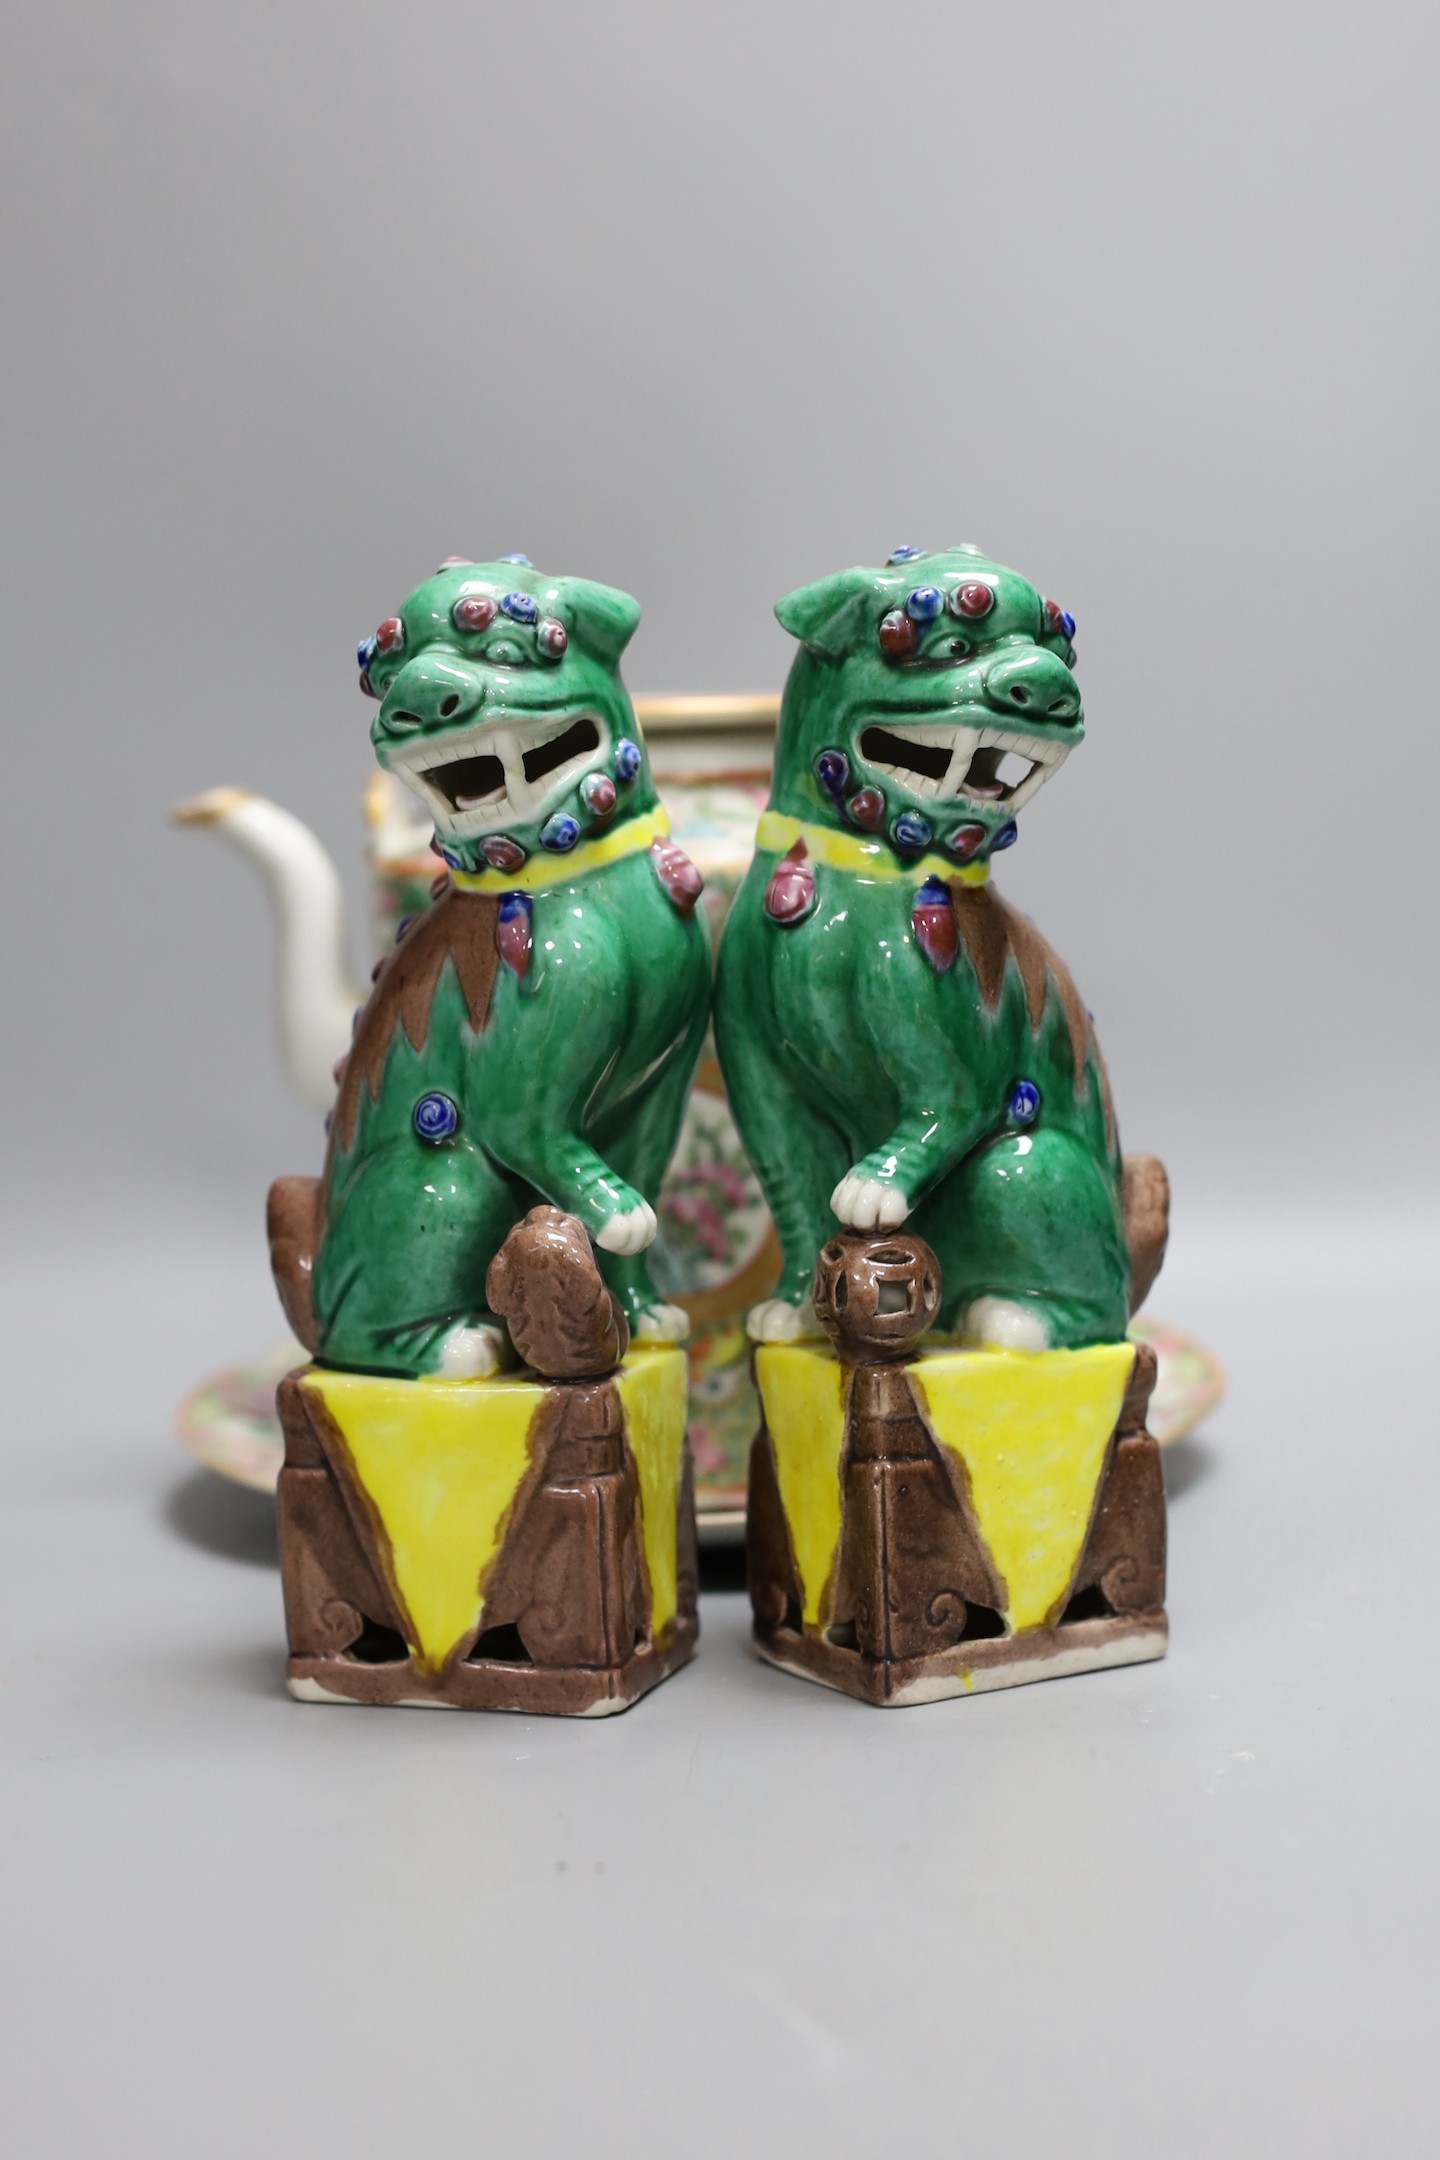 A Cantonese famille rose plate and teapot with cover, a pair of Chinese seated dogs, and a tureen with cover and oval dish, And a Chinese faux lacquer dragon and Phoenix dish, teapot 18 cms high